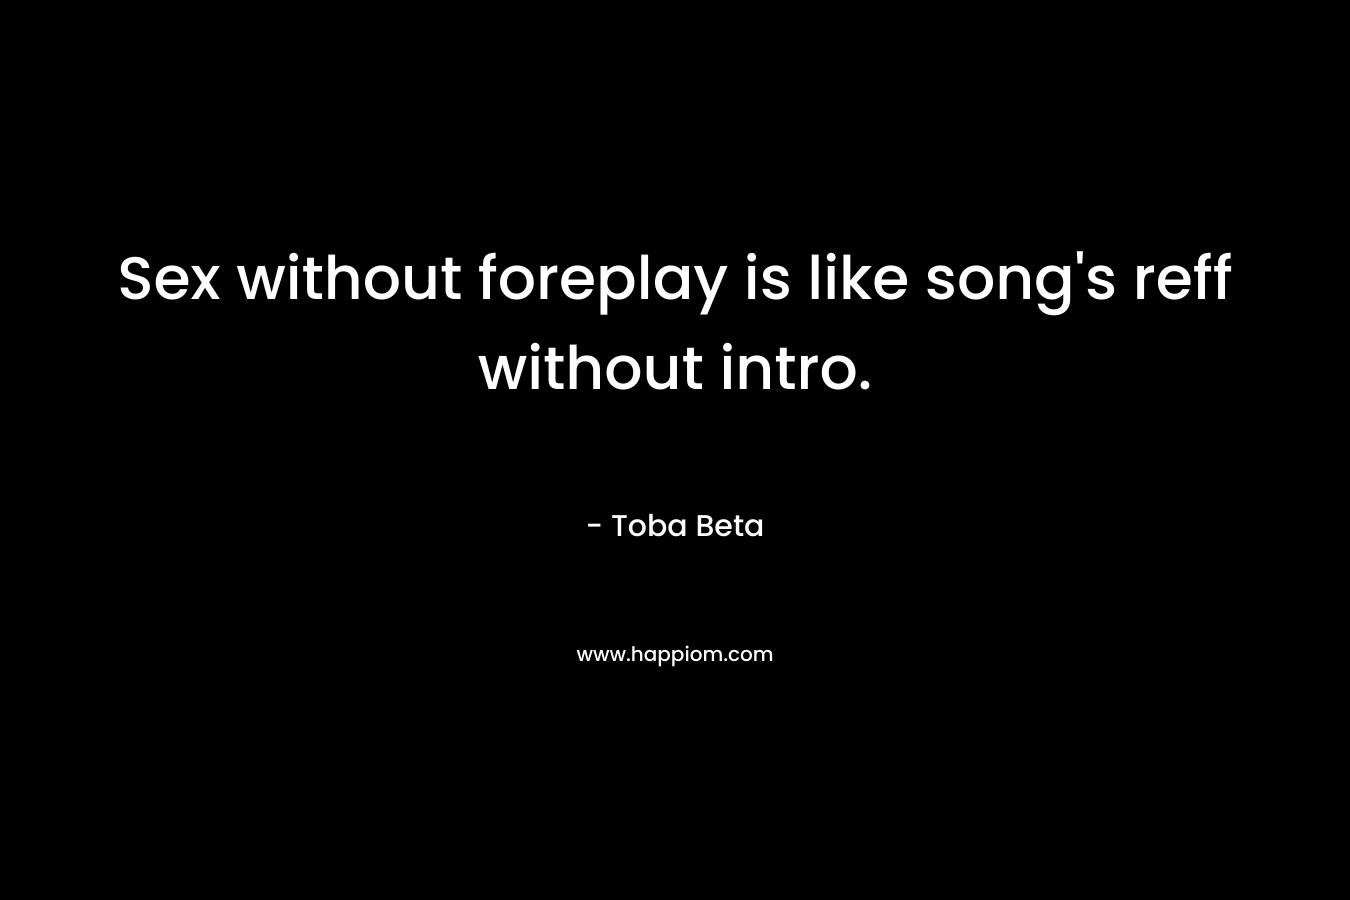 Sex without foreplay is like song's reff without intro.